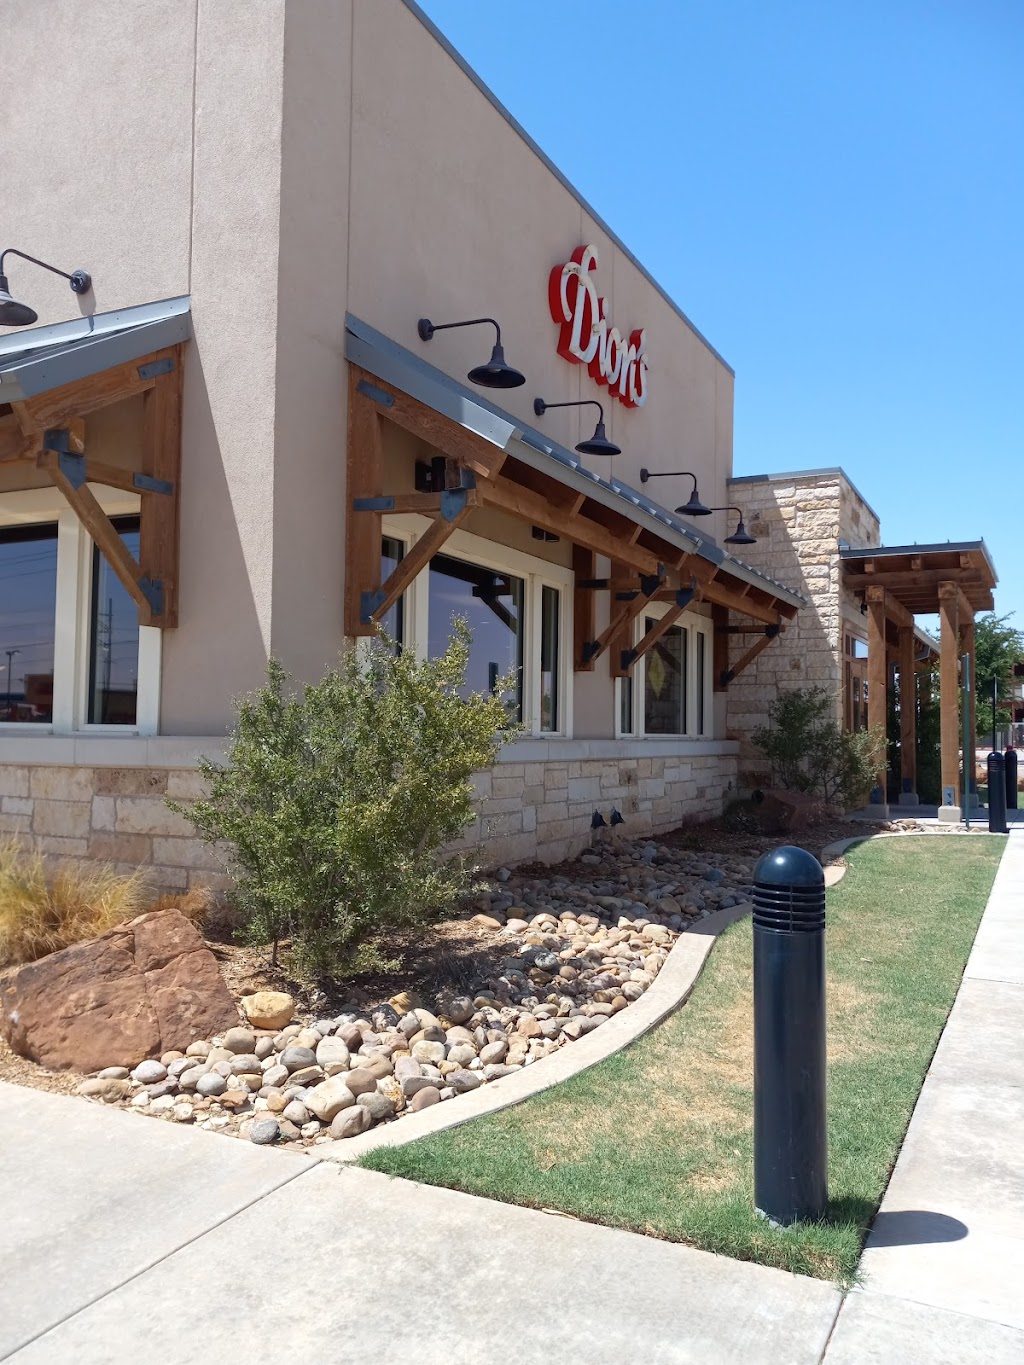 Dions | restaurant | 6410 82nd St, Lubbock, TX 79424, USA | 8067474800 OR +1 806-747-4800